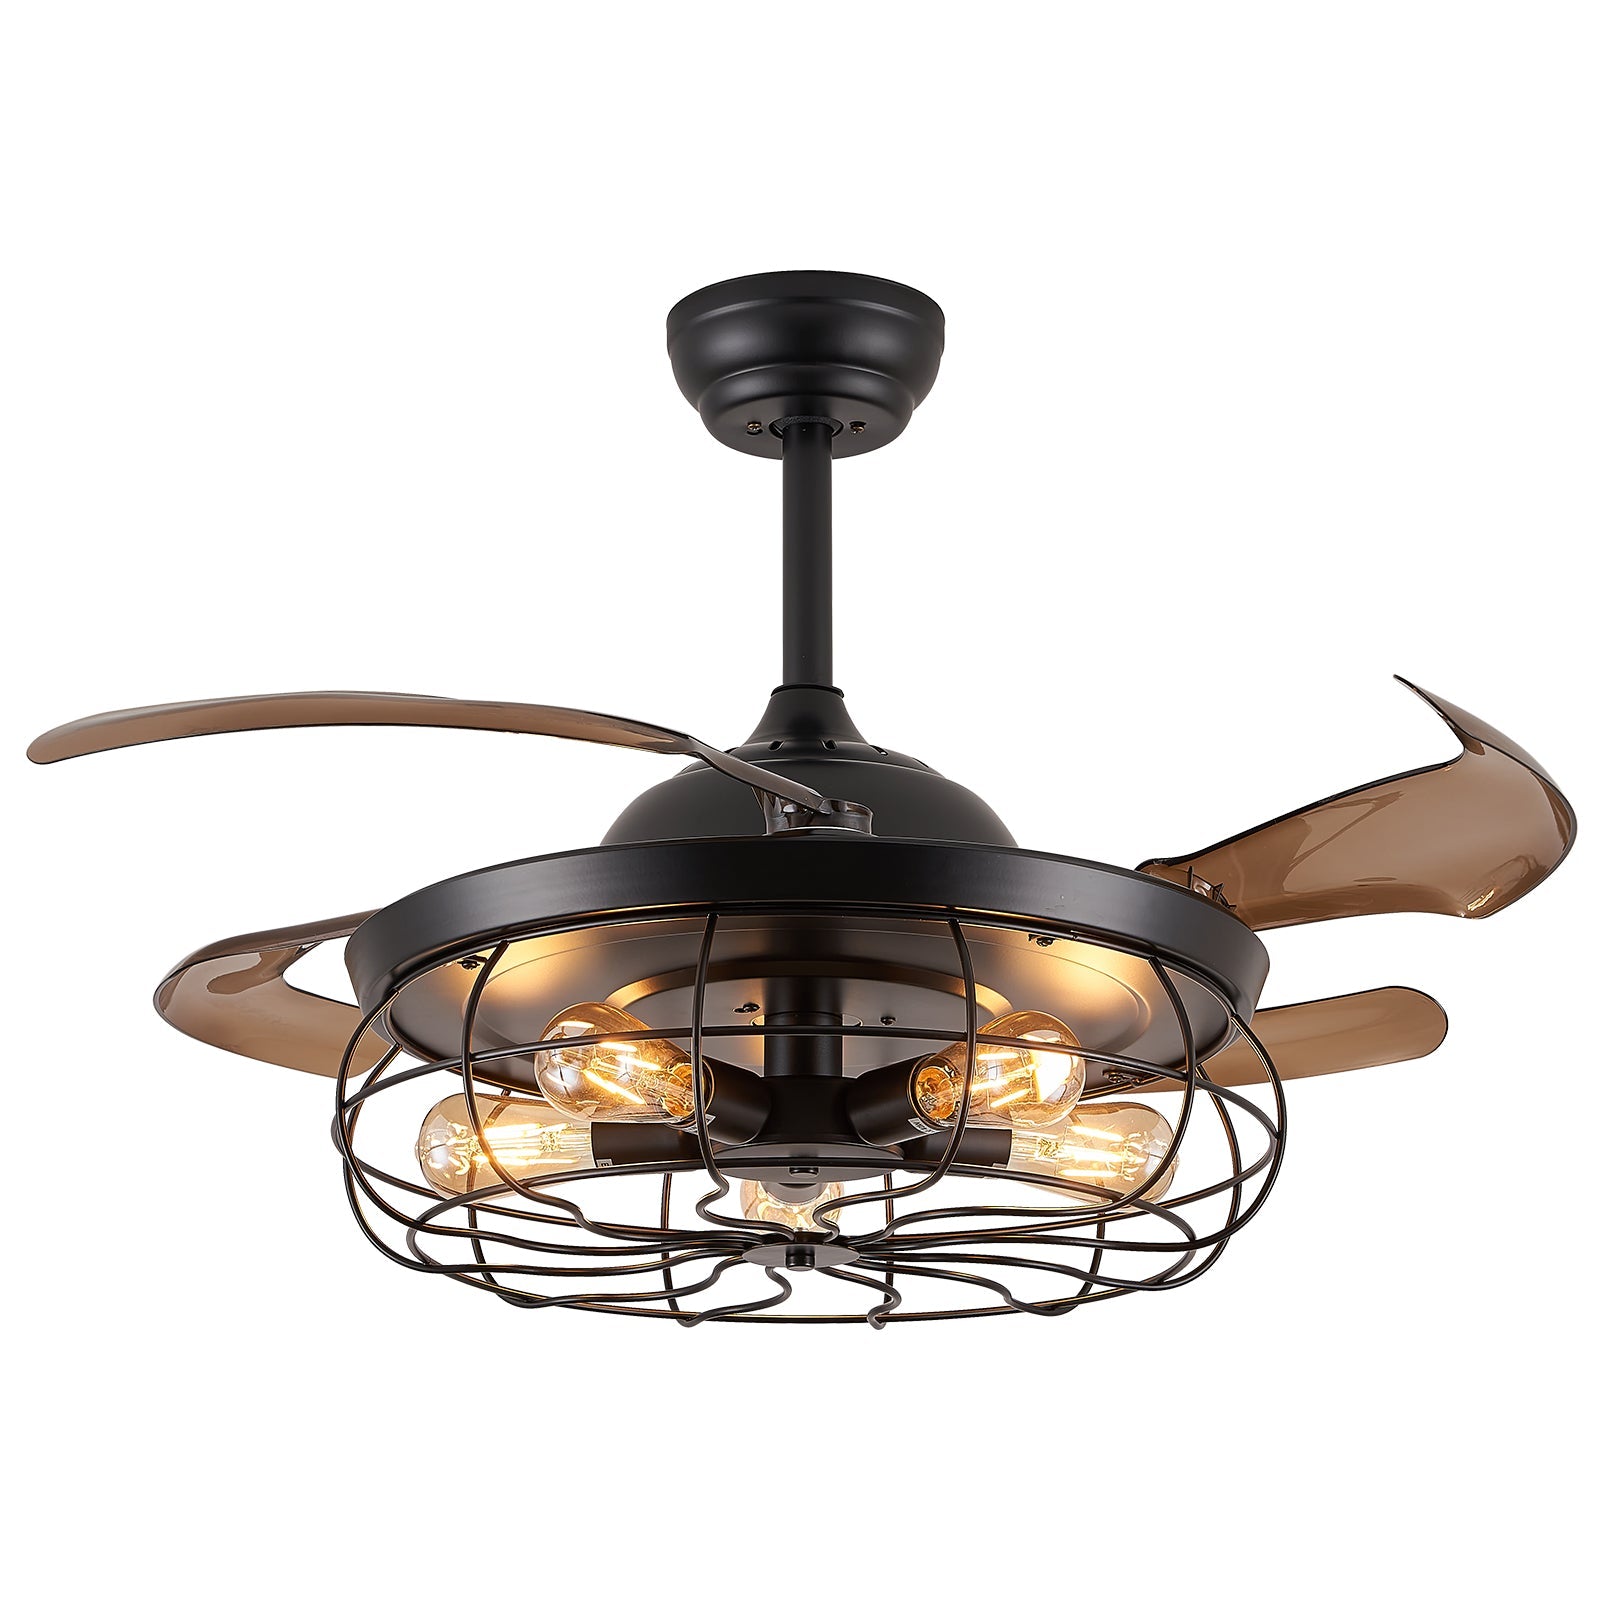 Luis 42" Fan: 6-Speed, Reverse, Timer, Natural Wind, 30W (Variable Frequency Motor), Living Room, Bedroom